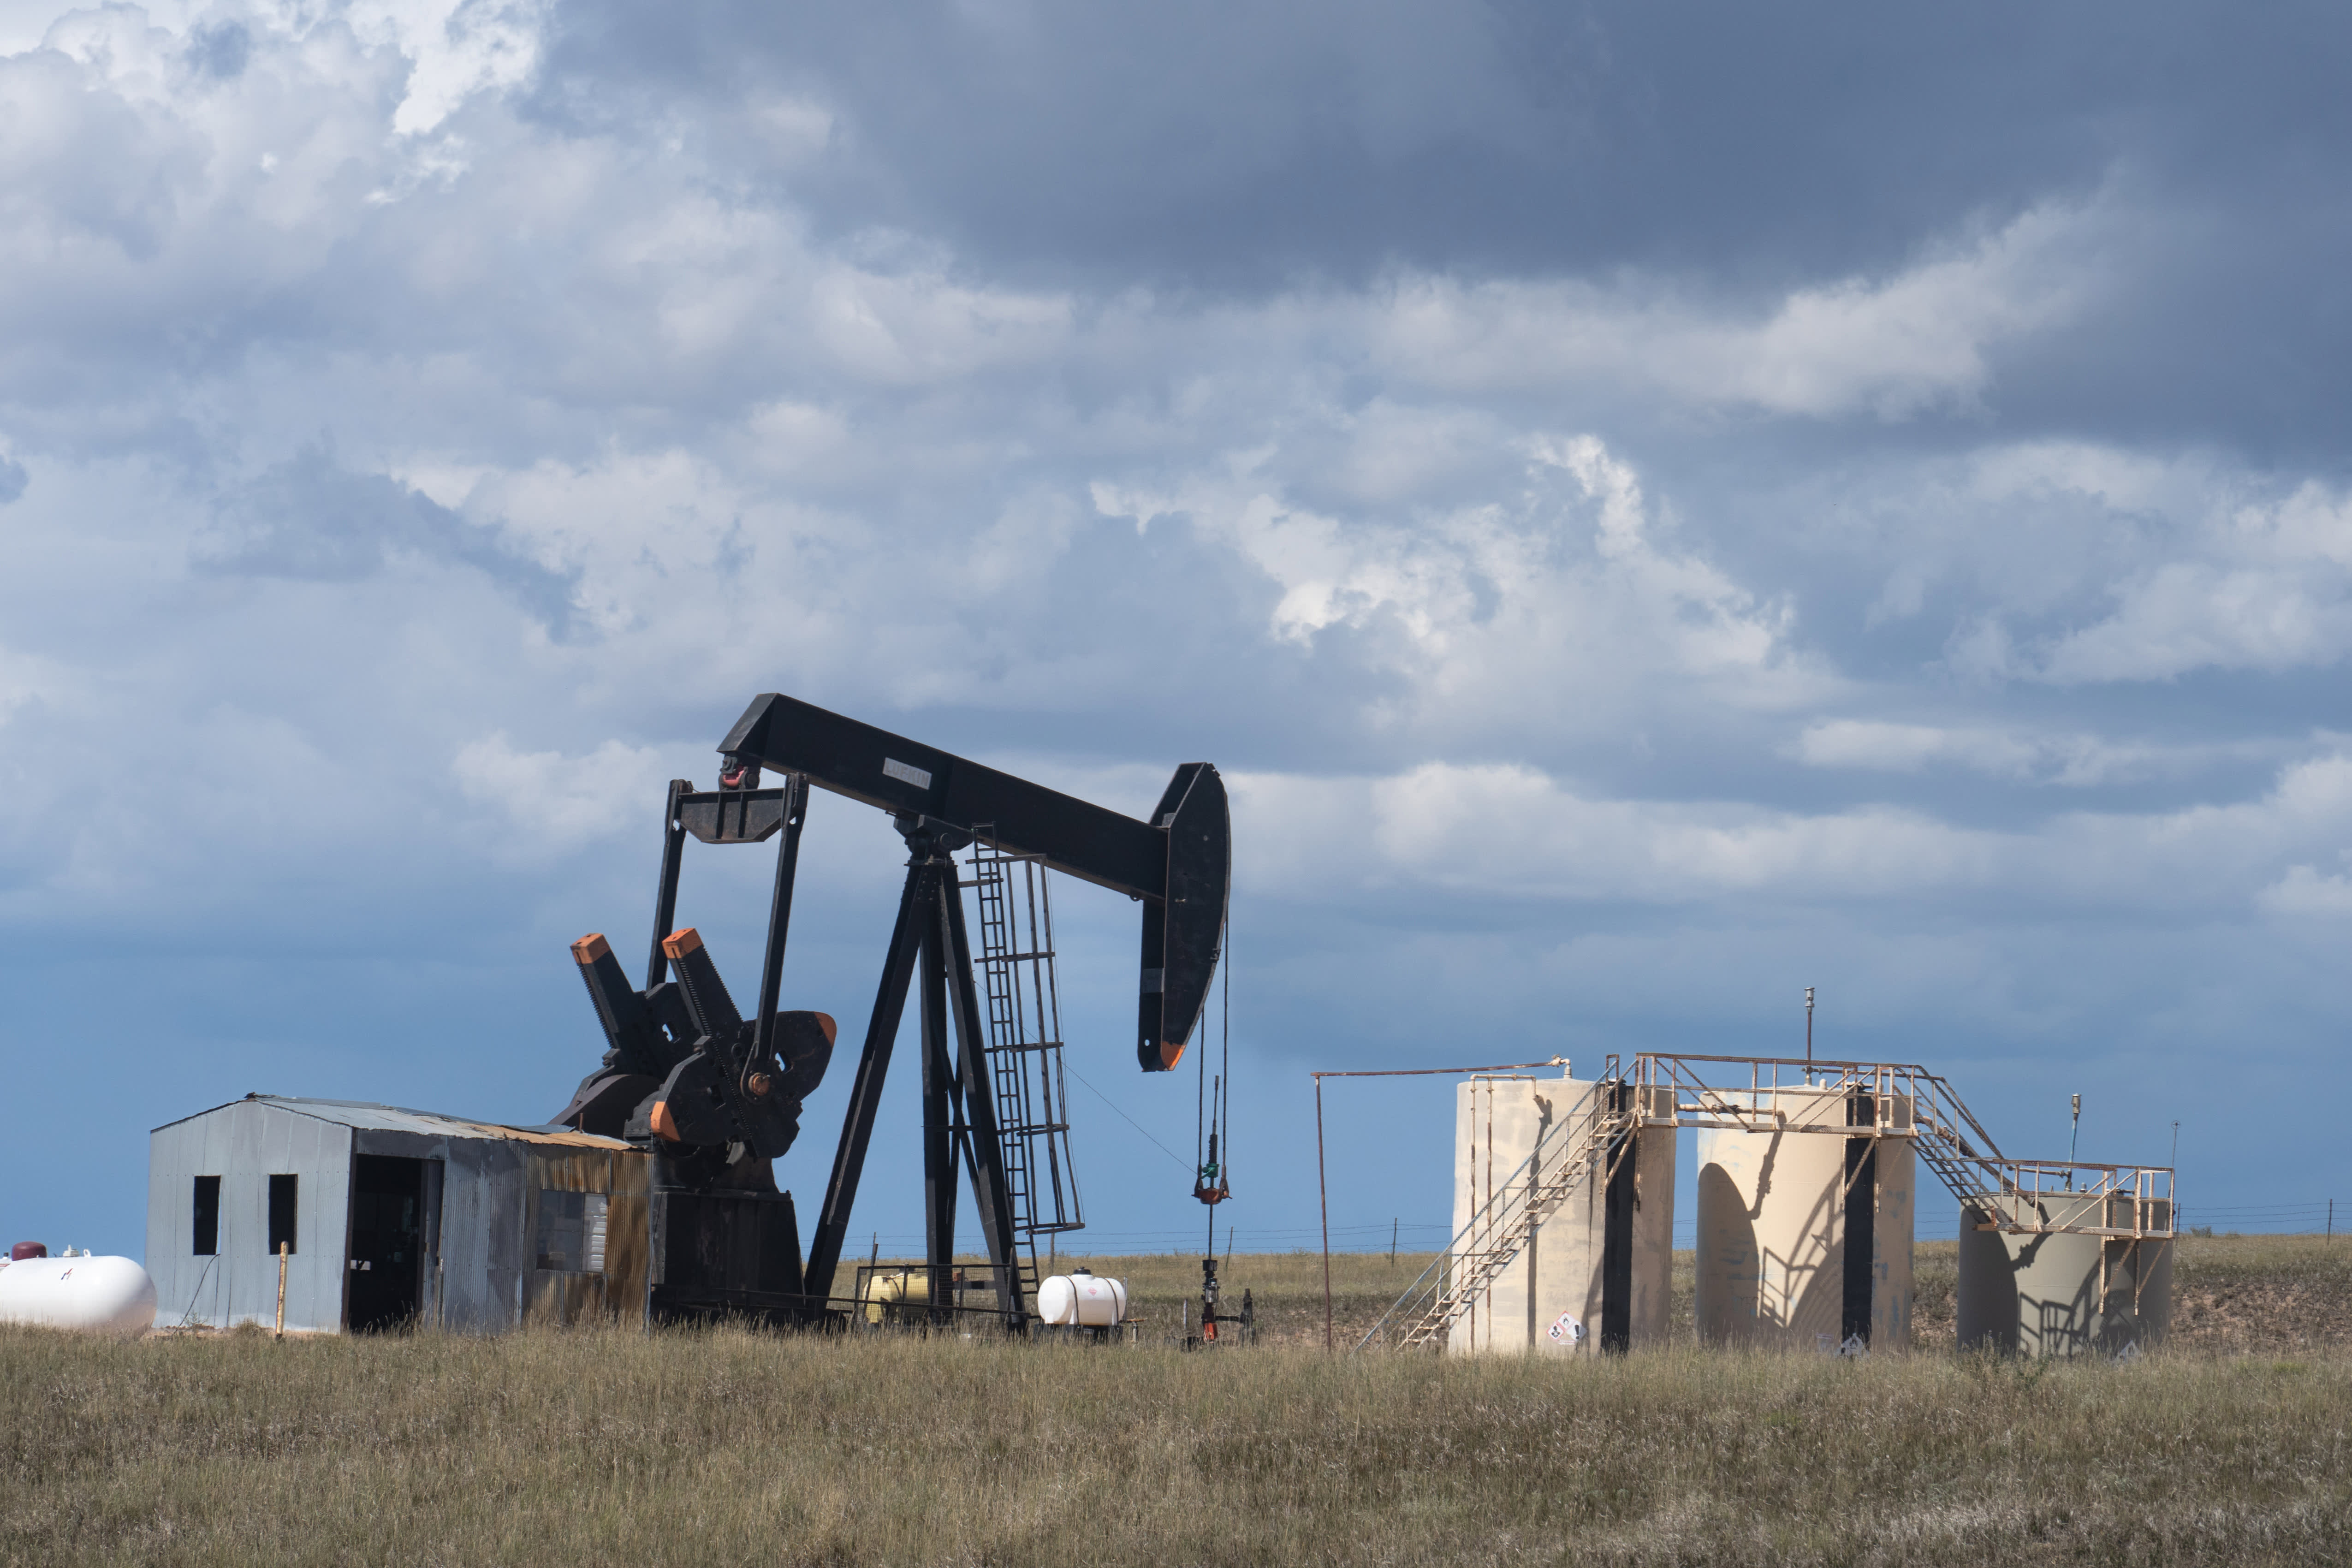 Oil prices stabilize, preparing for a weekly decline due to concerns about the U.S. economy